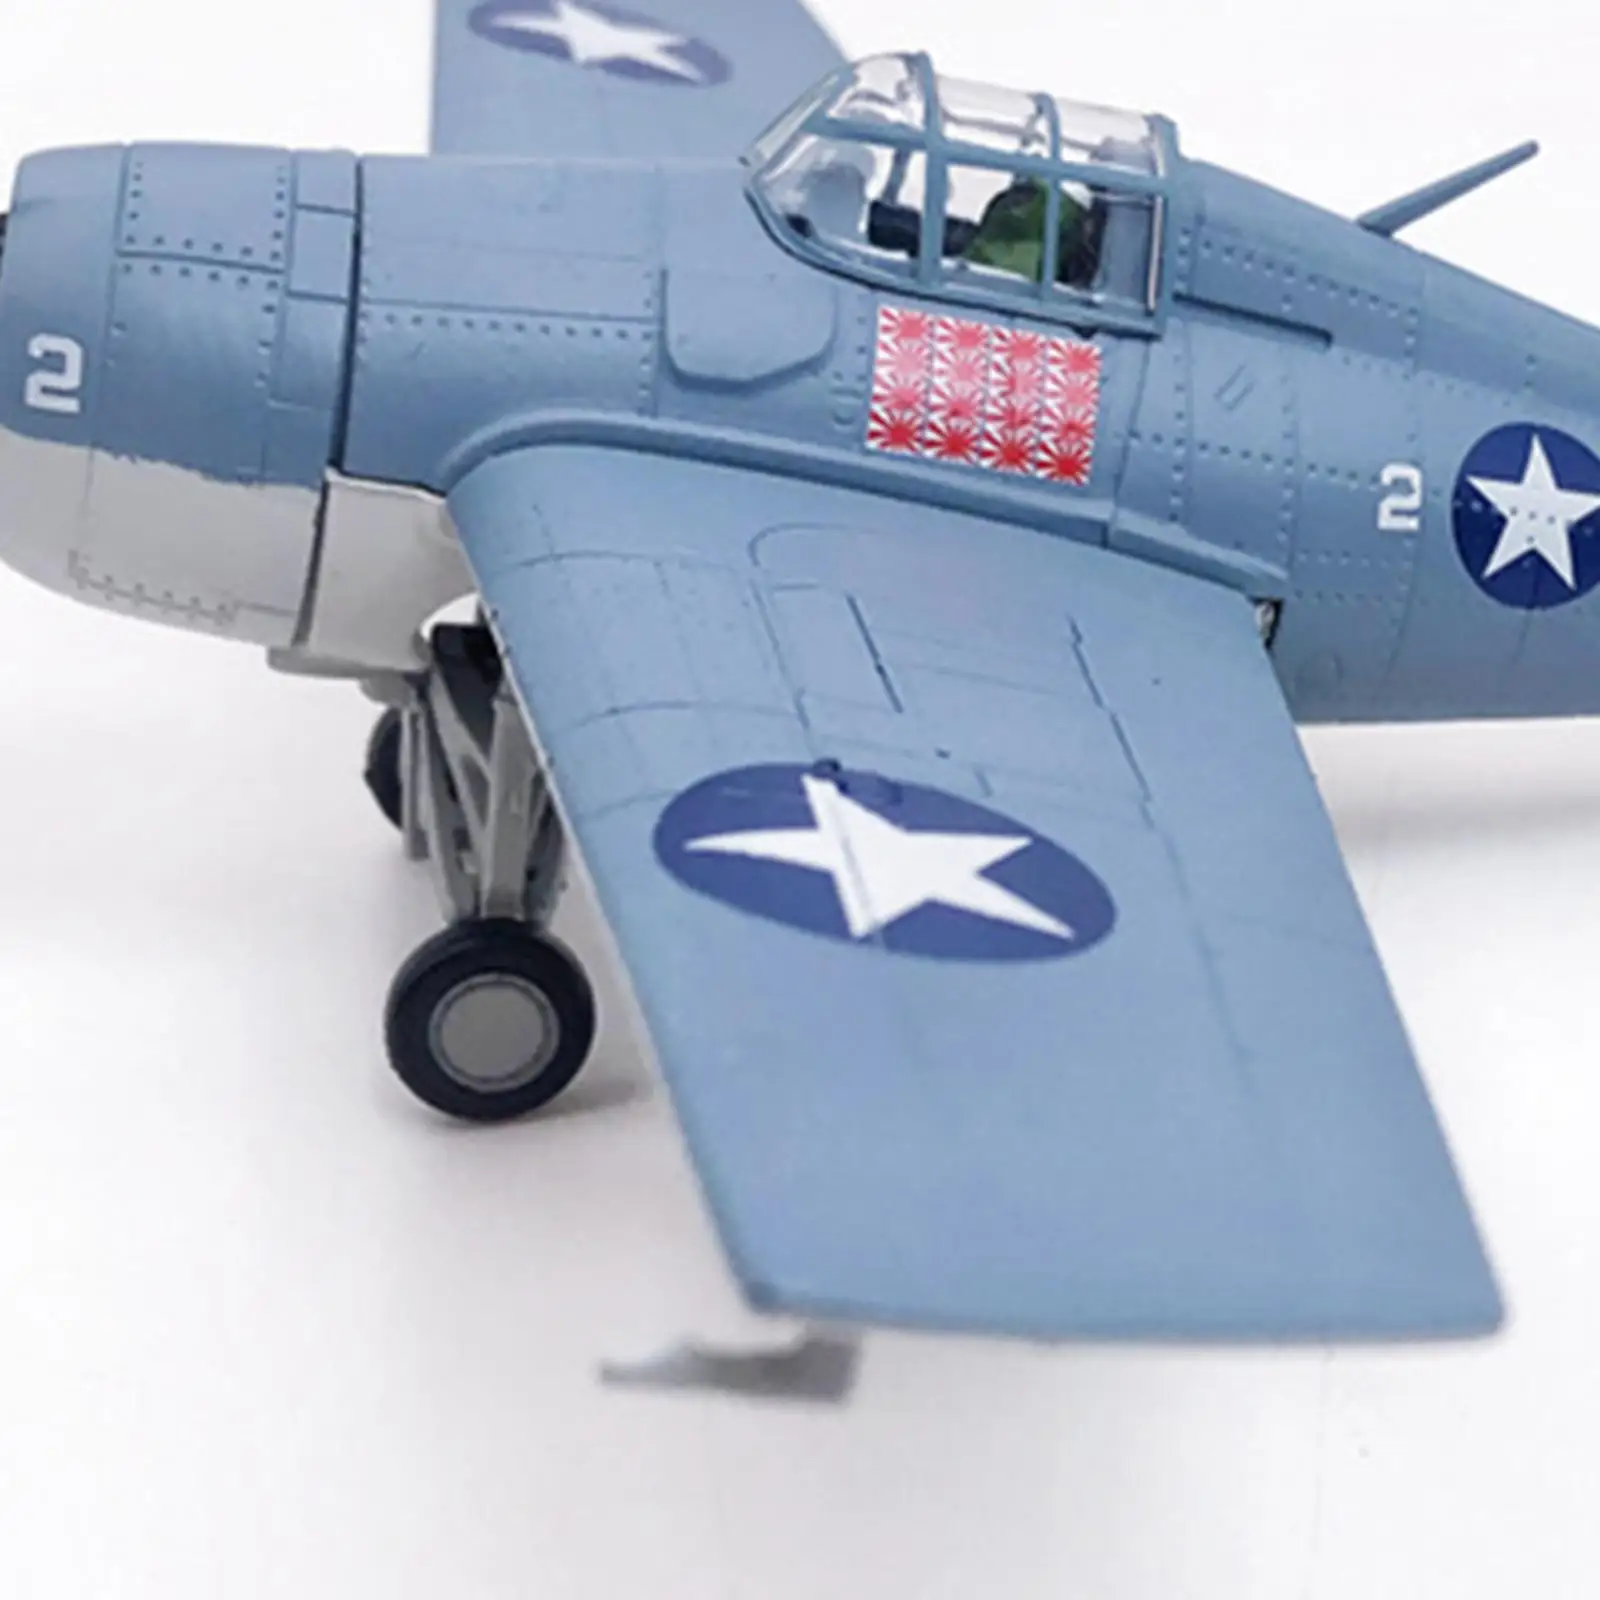 US  Plane Model 1:72 Scale 3D Alloy Simulation Ornament Fighter Model Toy for Living Room Home Table Decor Accessory